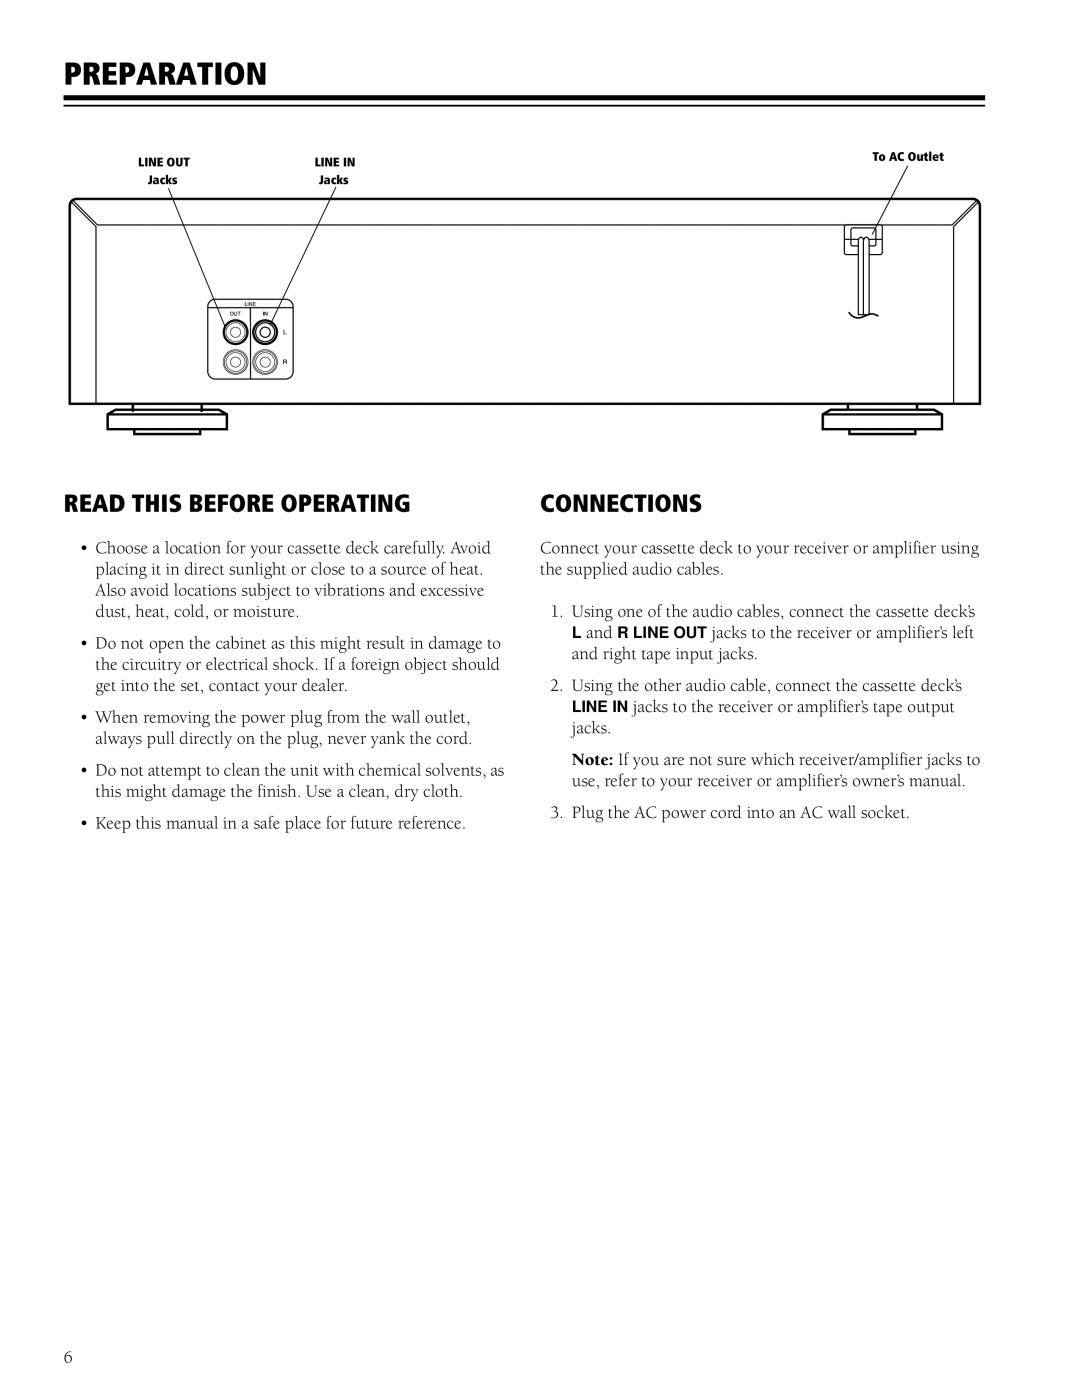 RCA SCT-520 manual Preparation, Read This Before Operating, Connections 